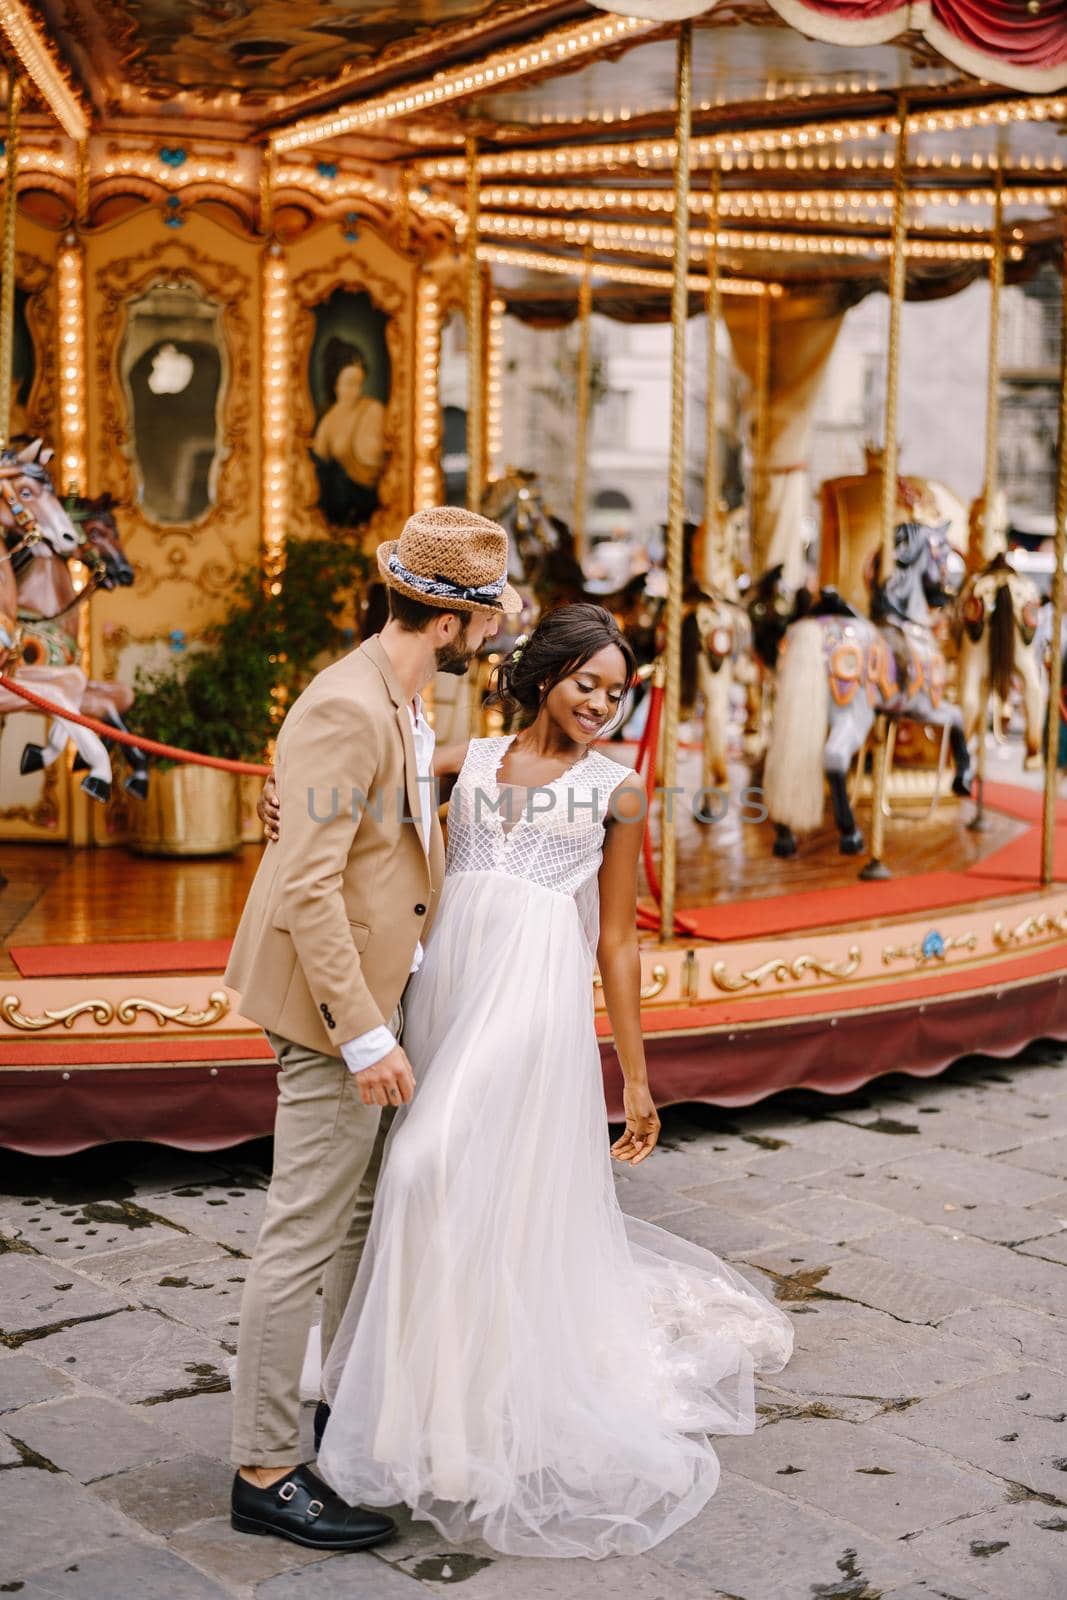 Interracial wedding couple. Wedding in Florence, Italy. African-American bride and Caucasian groom near the carousel. by Nadtochiy